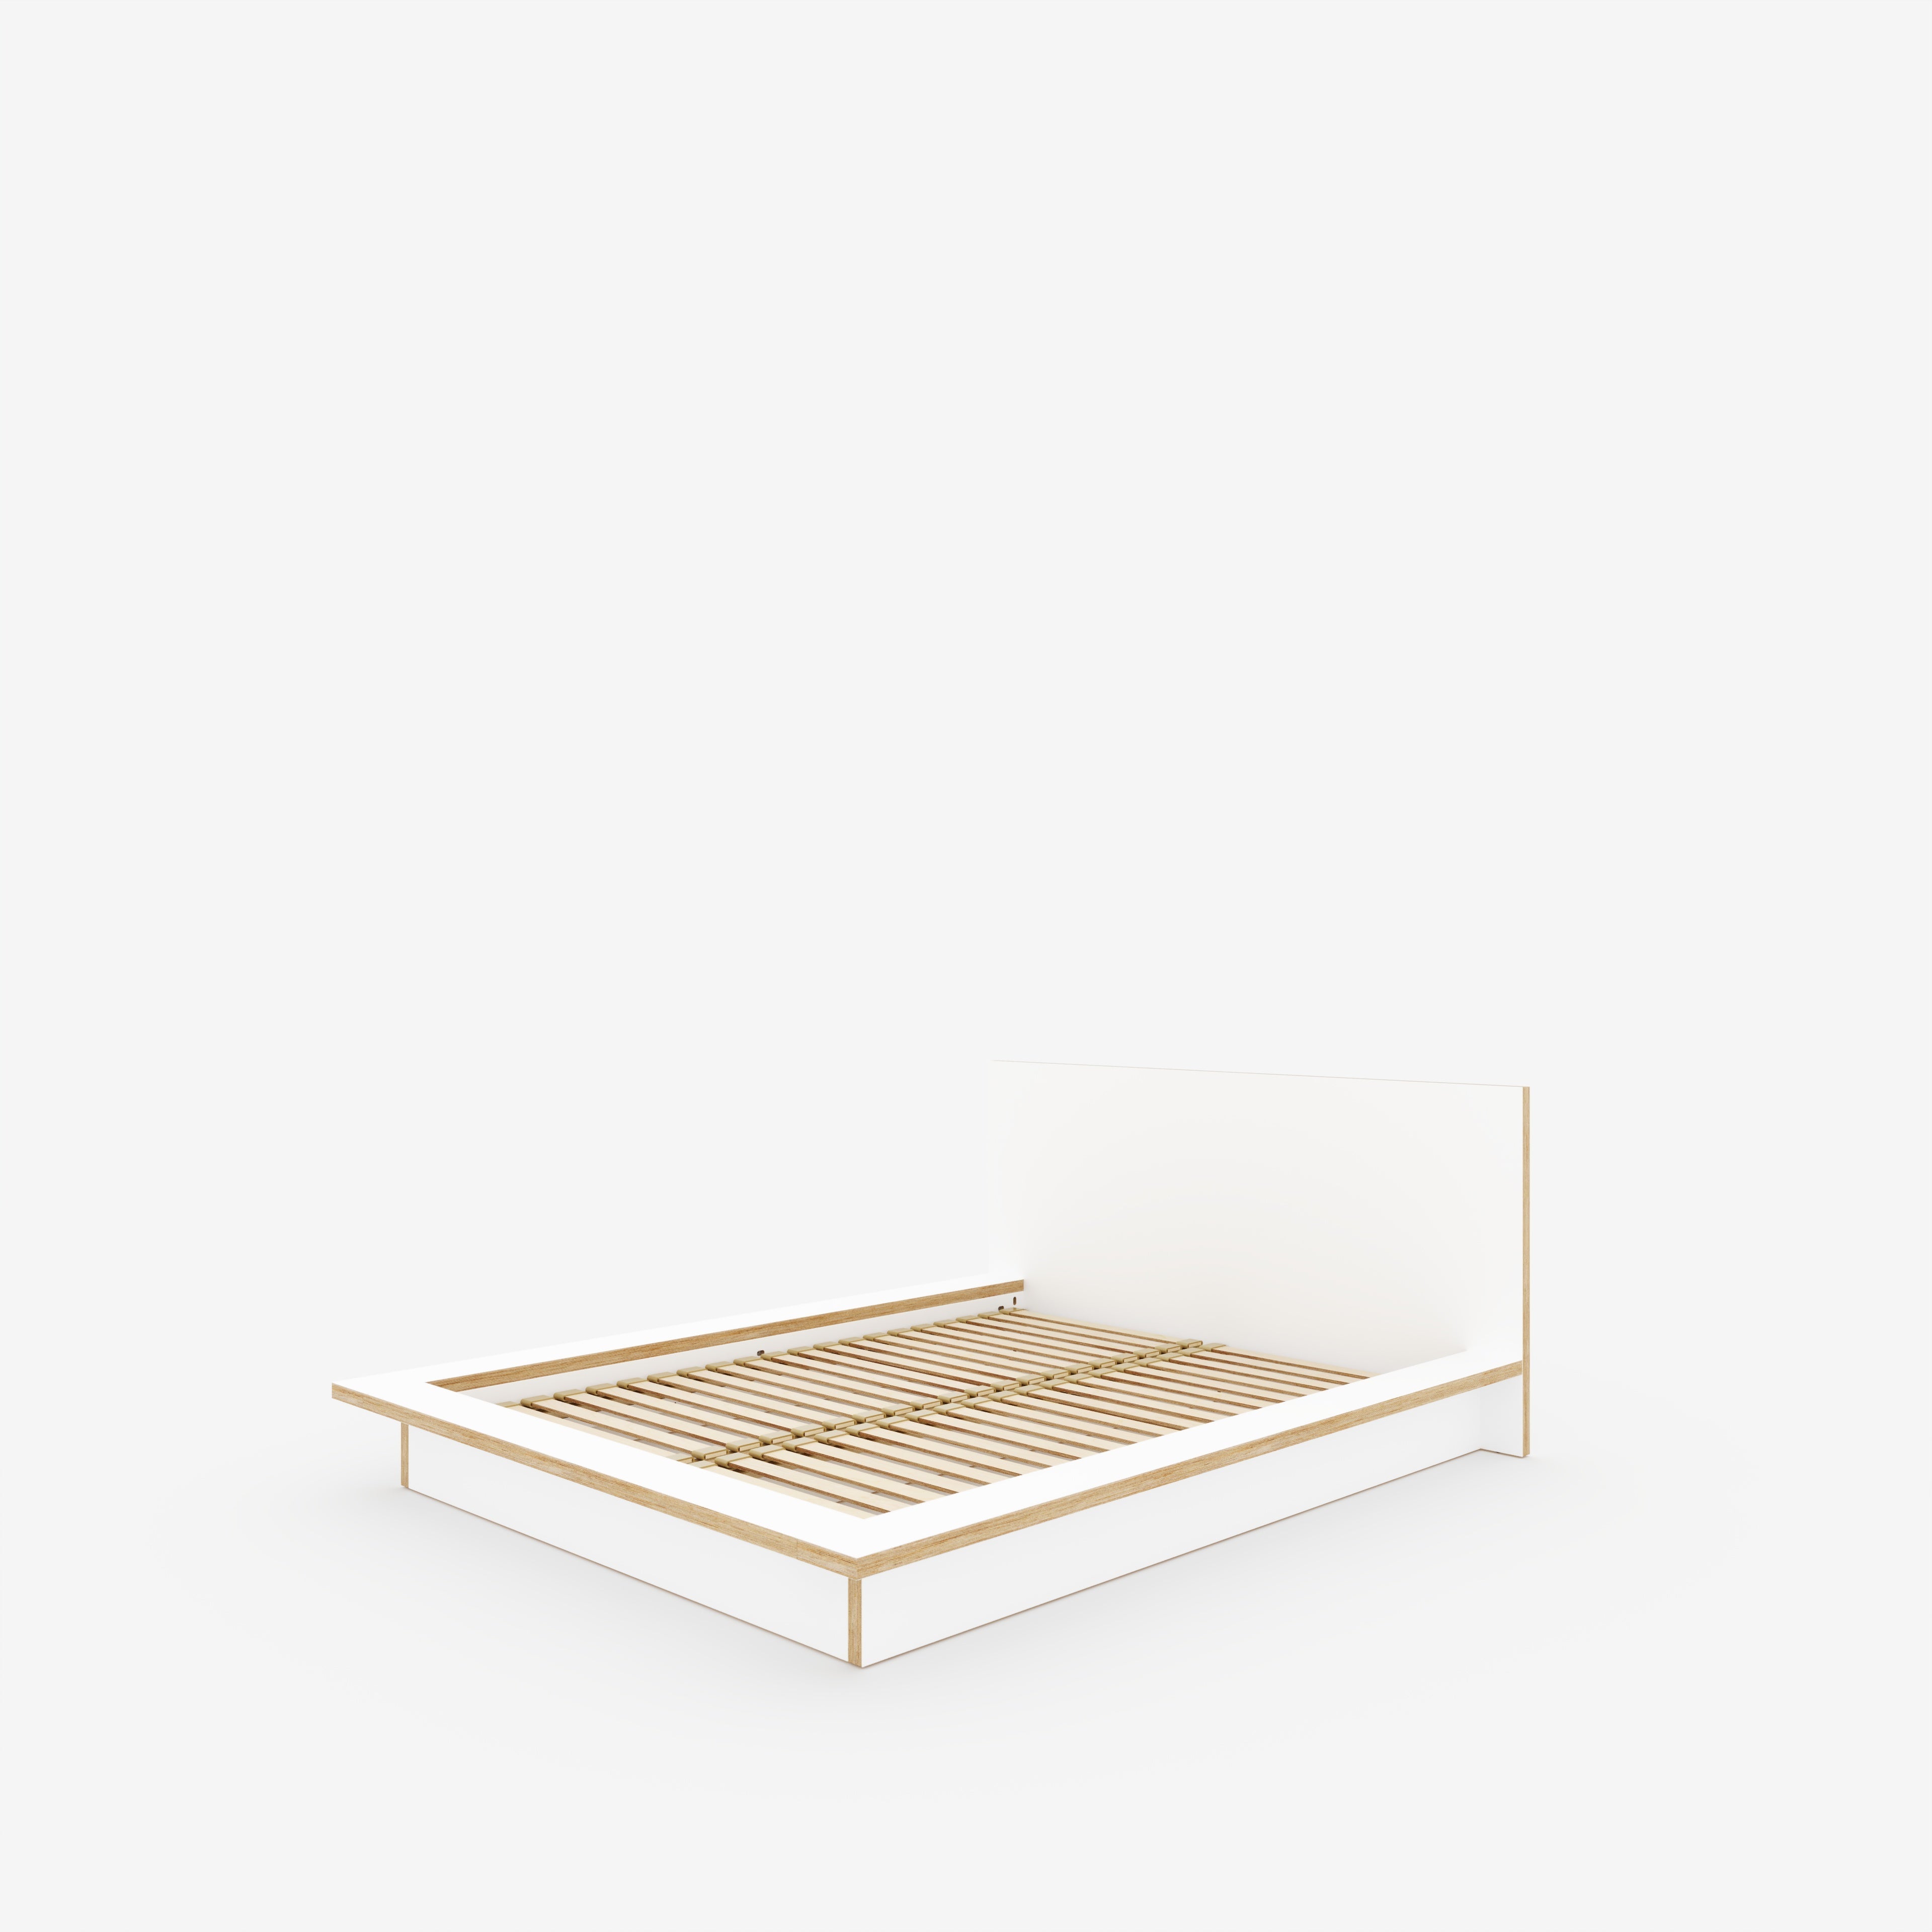 Plywood Platform Bed - Plywood Formica White - Standard King 1500(w) x 2000(d) Low